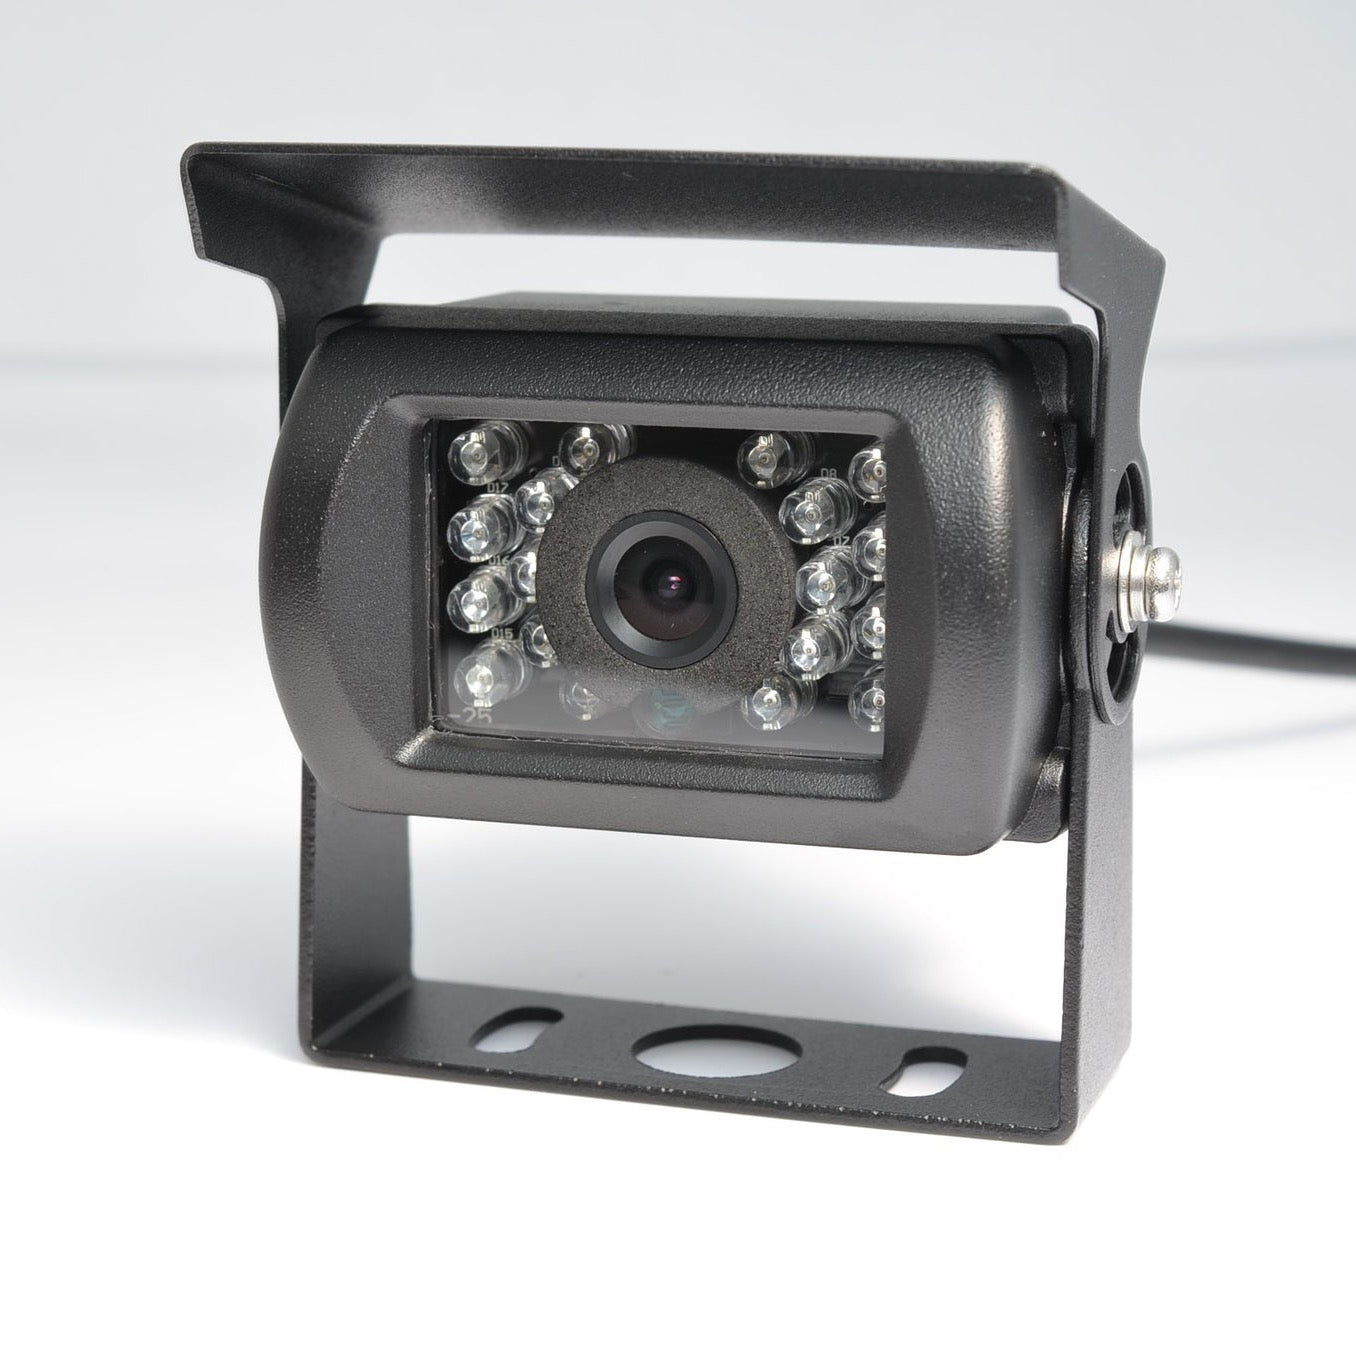 Parksafe 26-044CHD Replacement High Definition Camera Parksafe